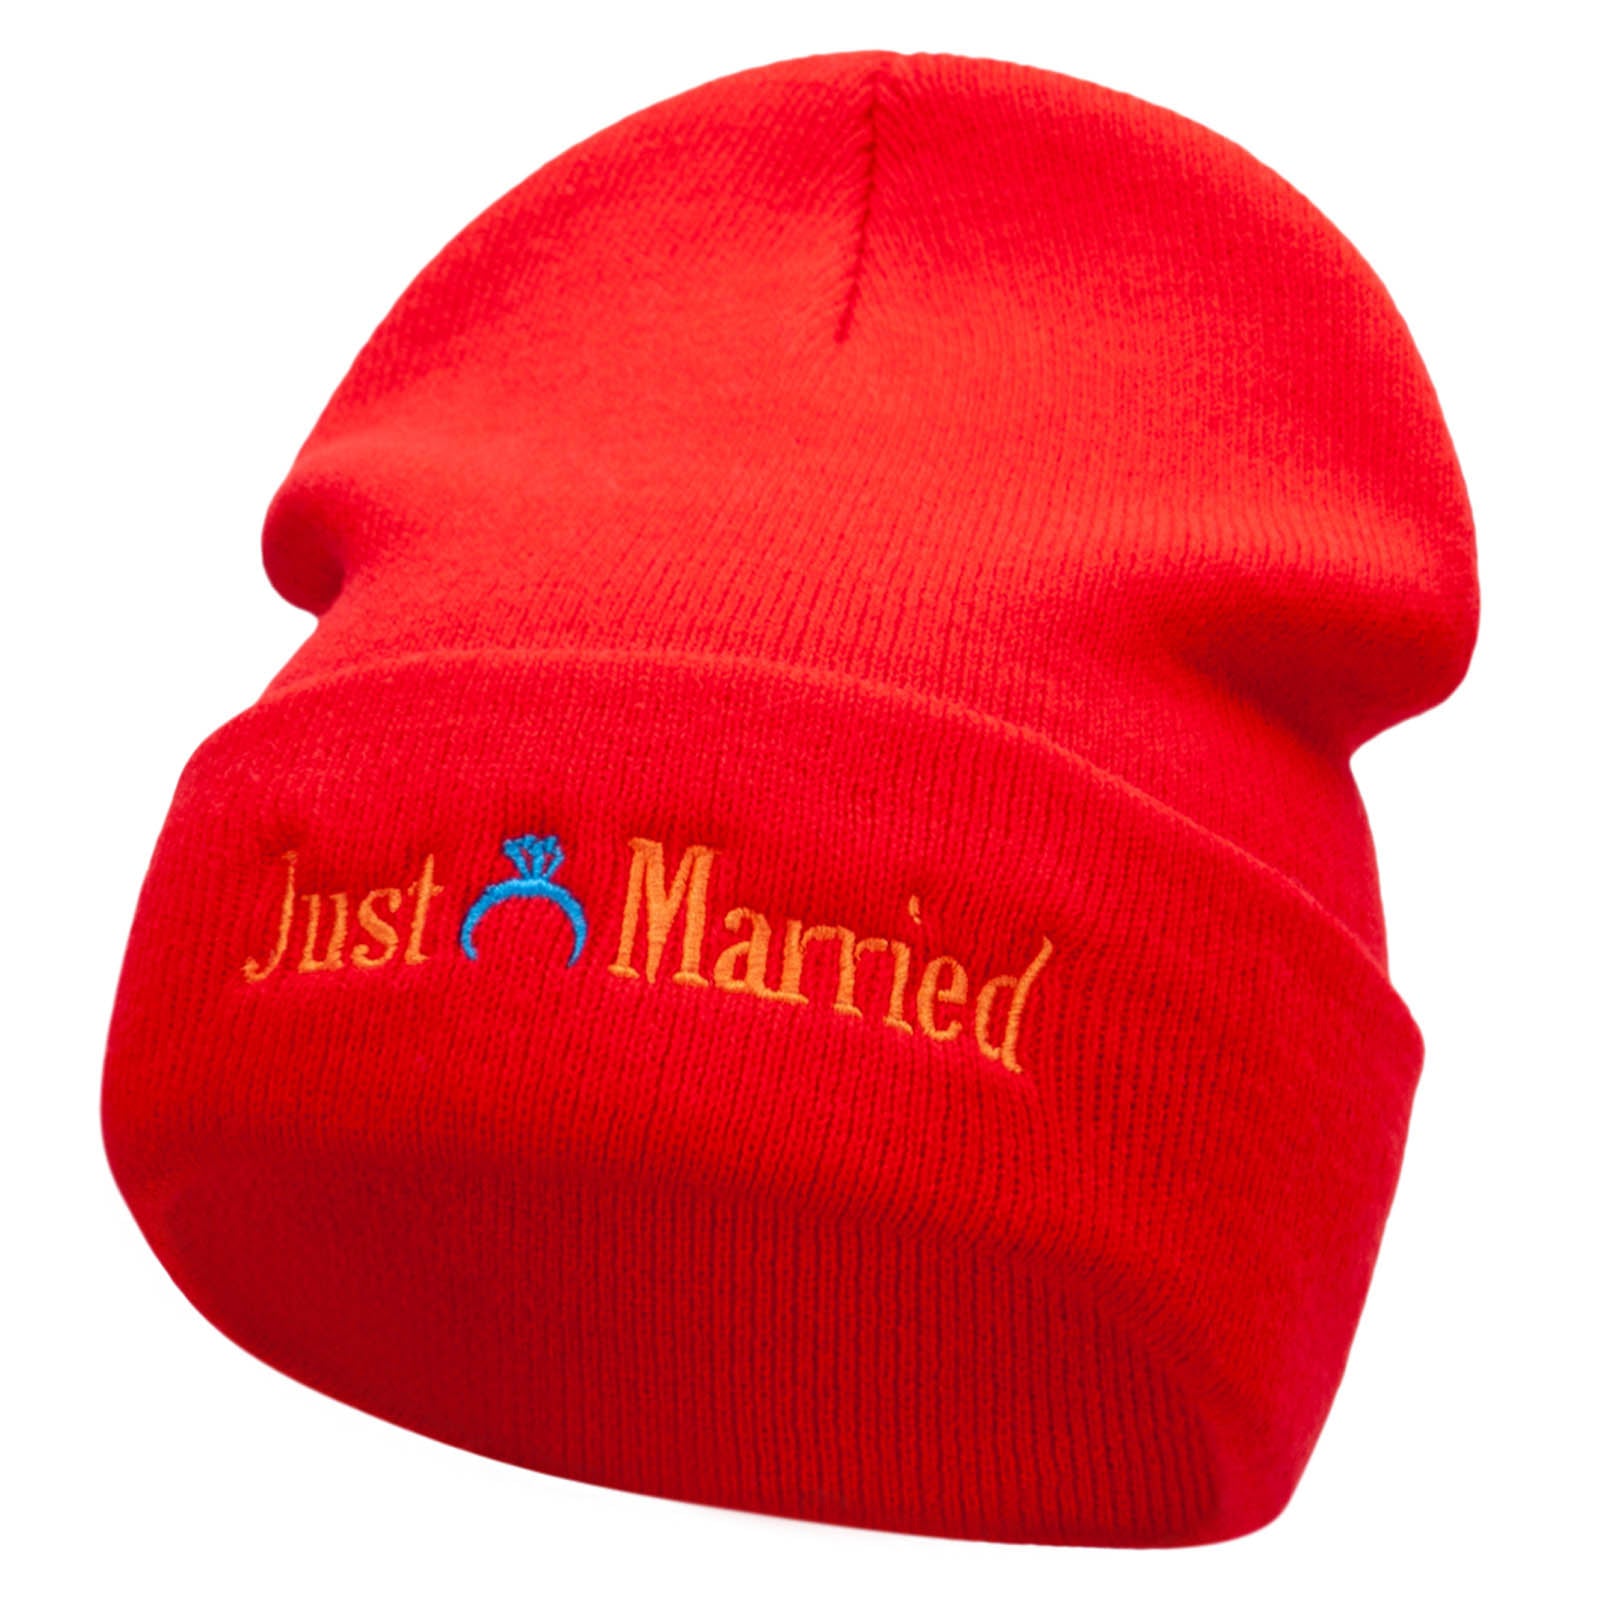 Just Married Ring Embroidered 12 Inch Long Knitted Beanie - Red OSFM